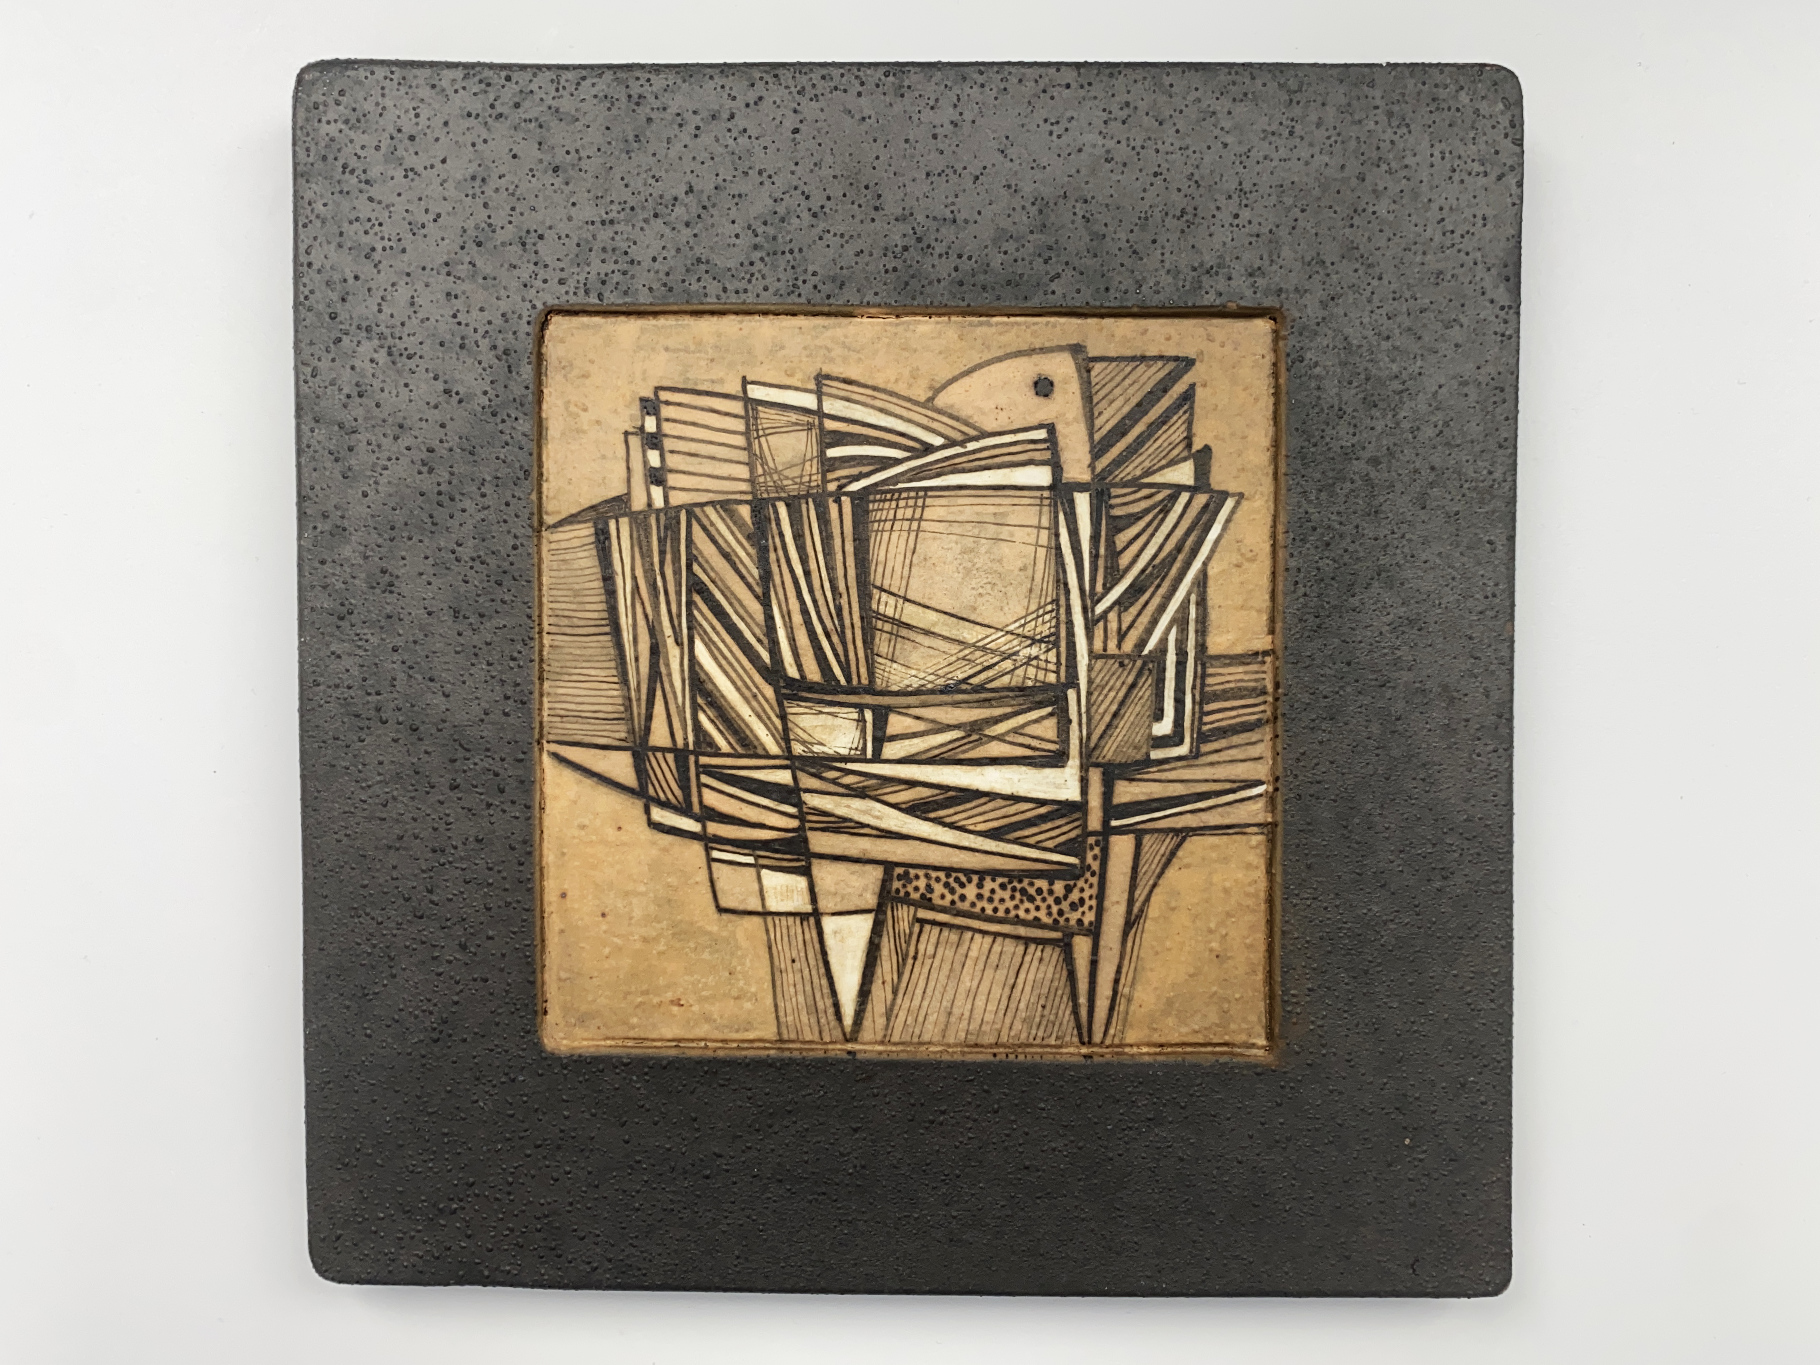 Wall-Plate, Ceramic, Stoneware, Unique Piece, Painting on Inlaid Center Field, by Wilhelm & Elly Kuch, 1995